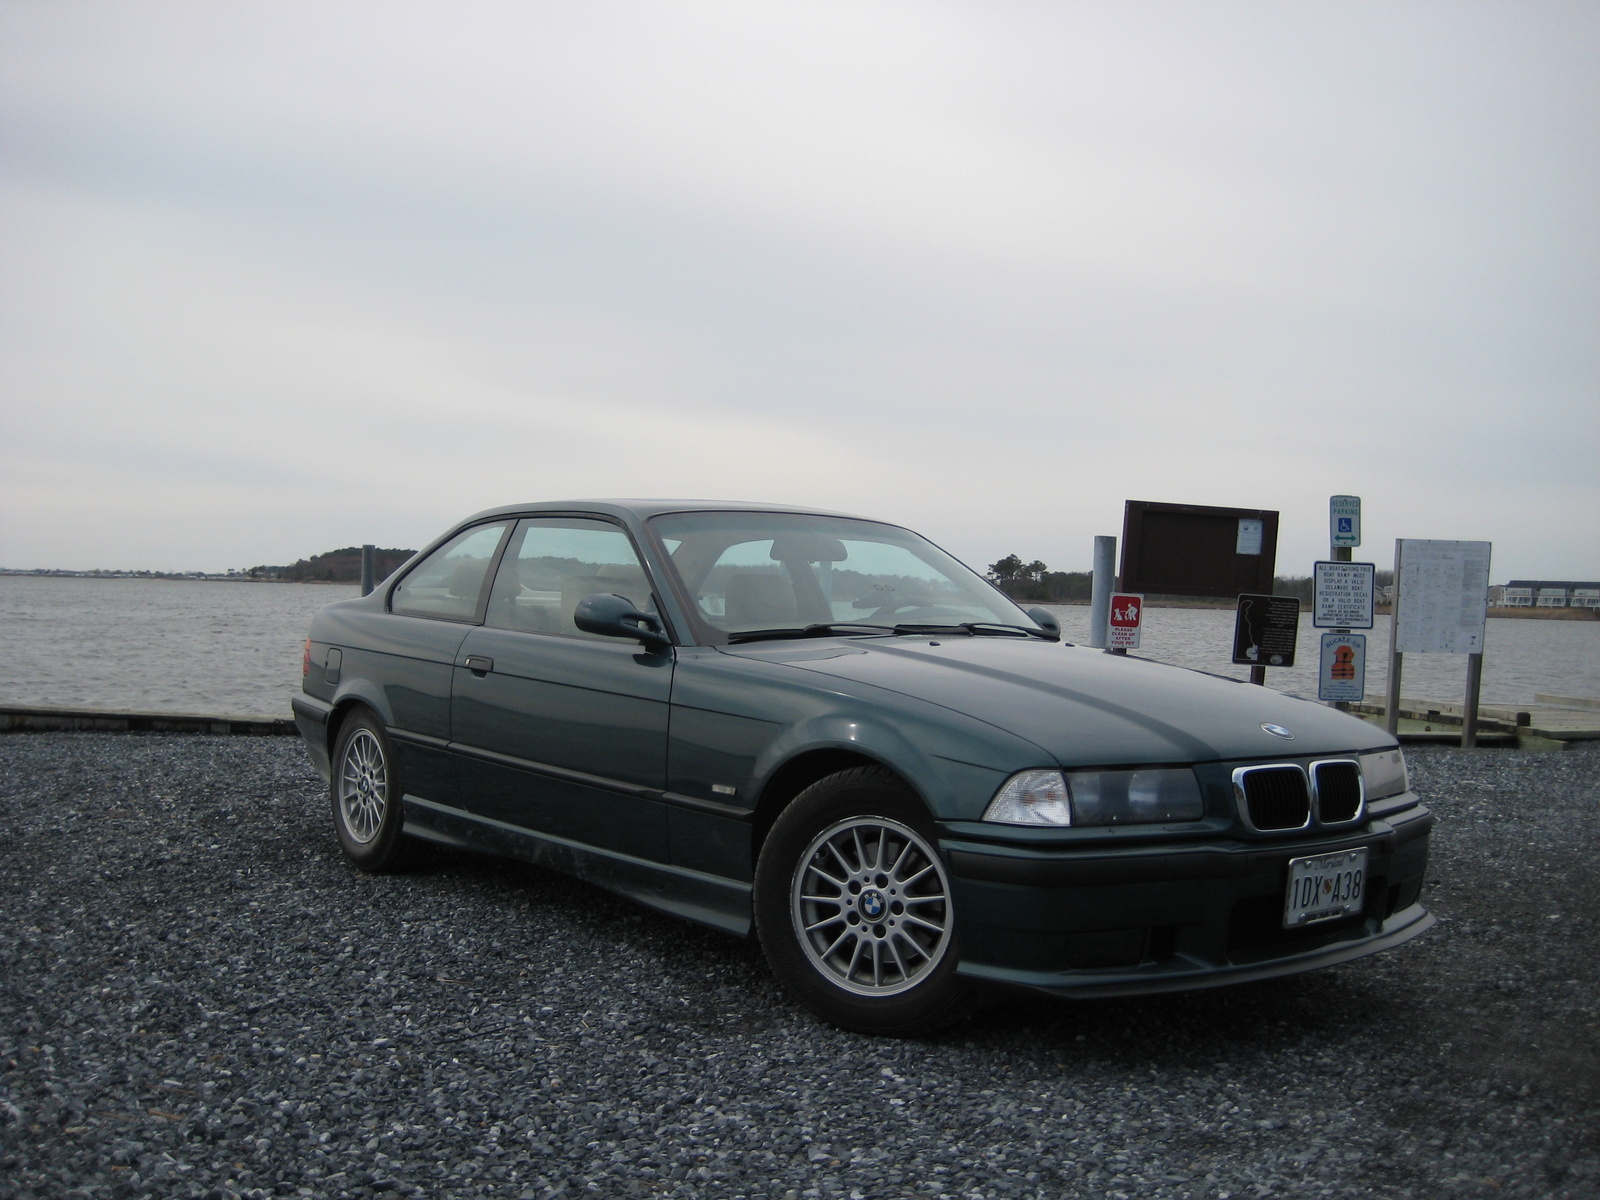 1998 Bmw 323i coupe review #4